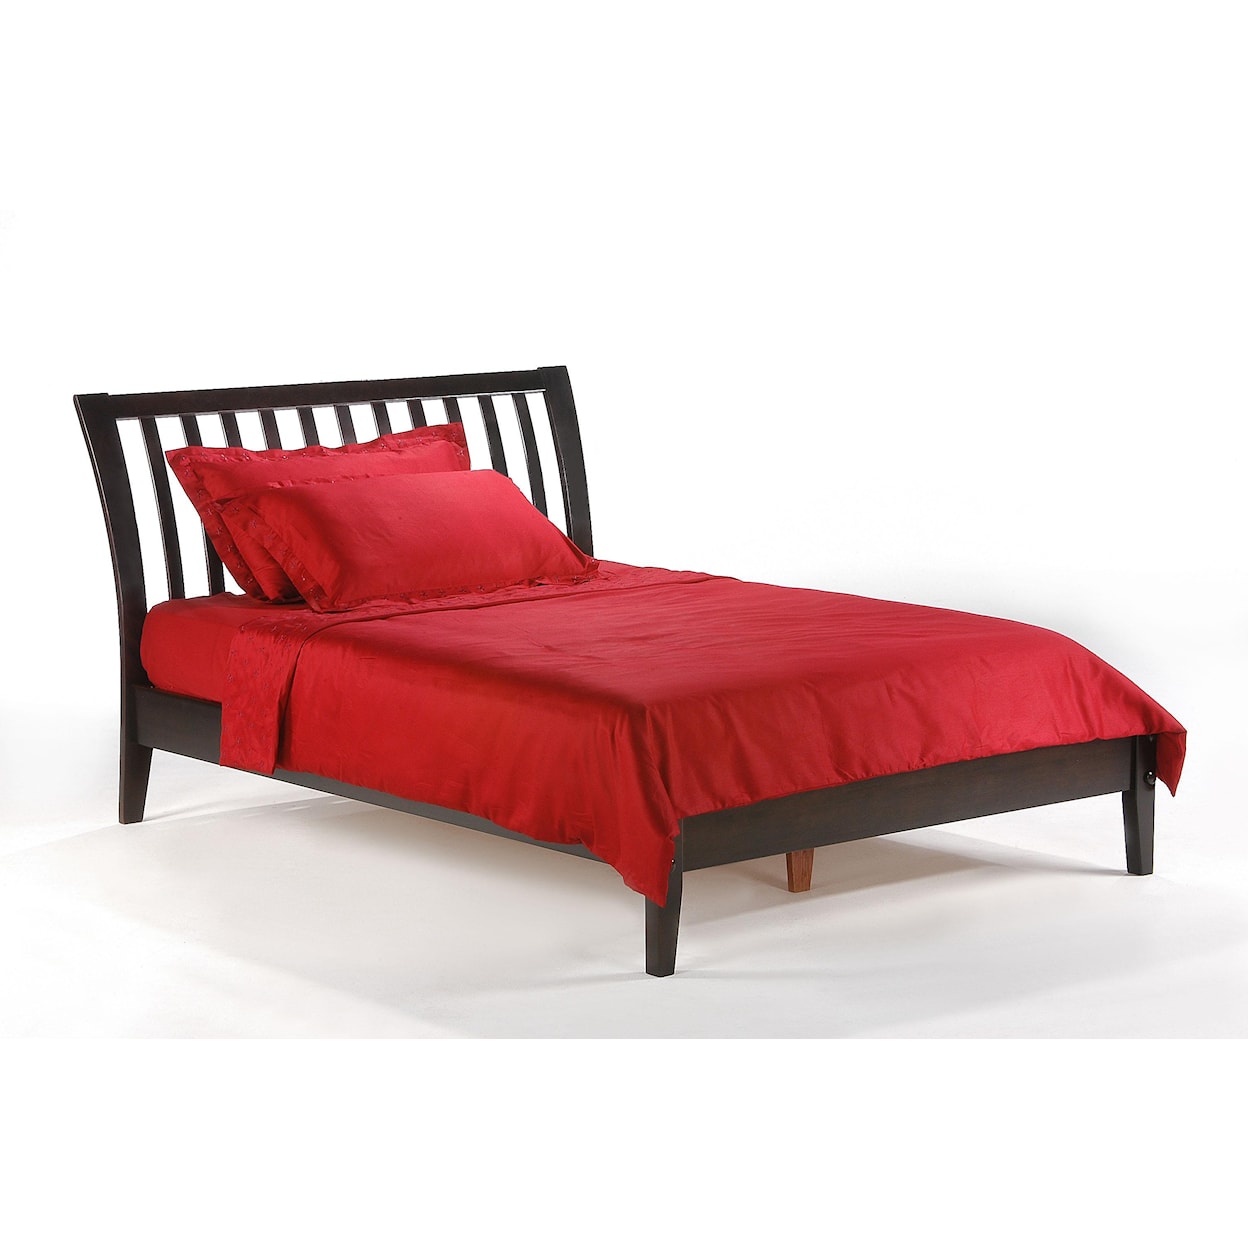 Night & Day Furniture Spice Queen Bed